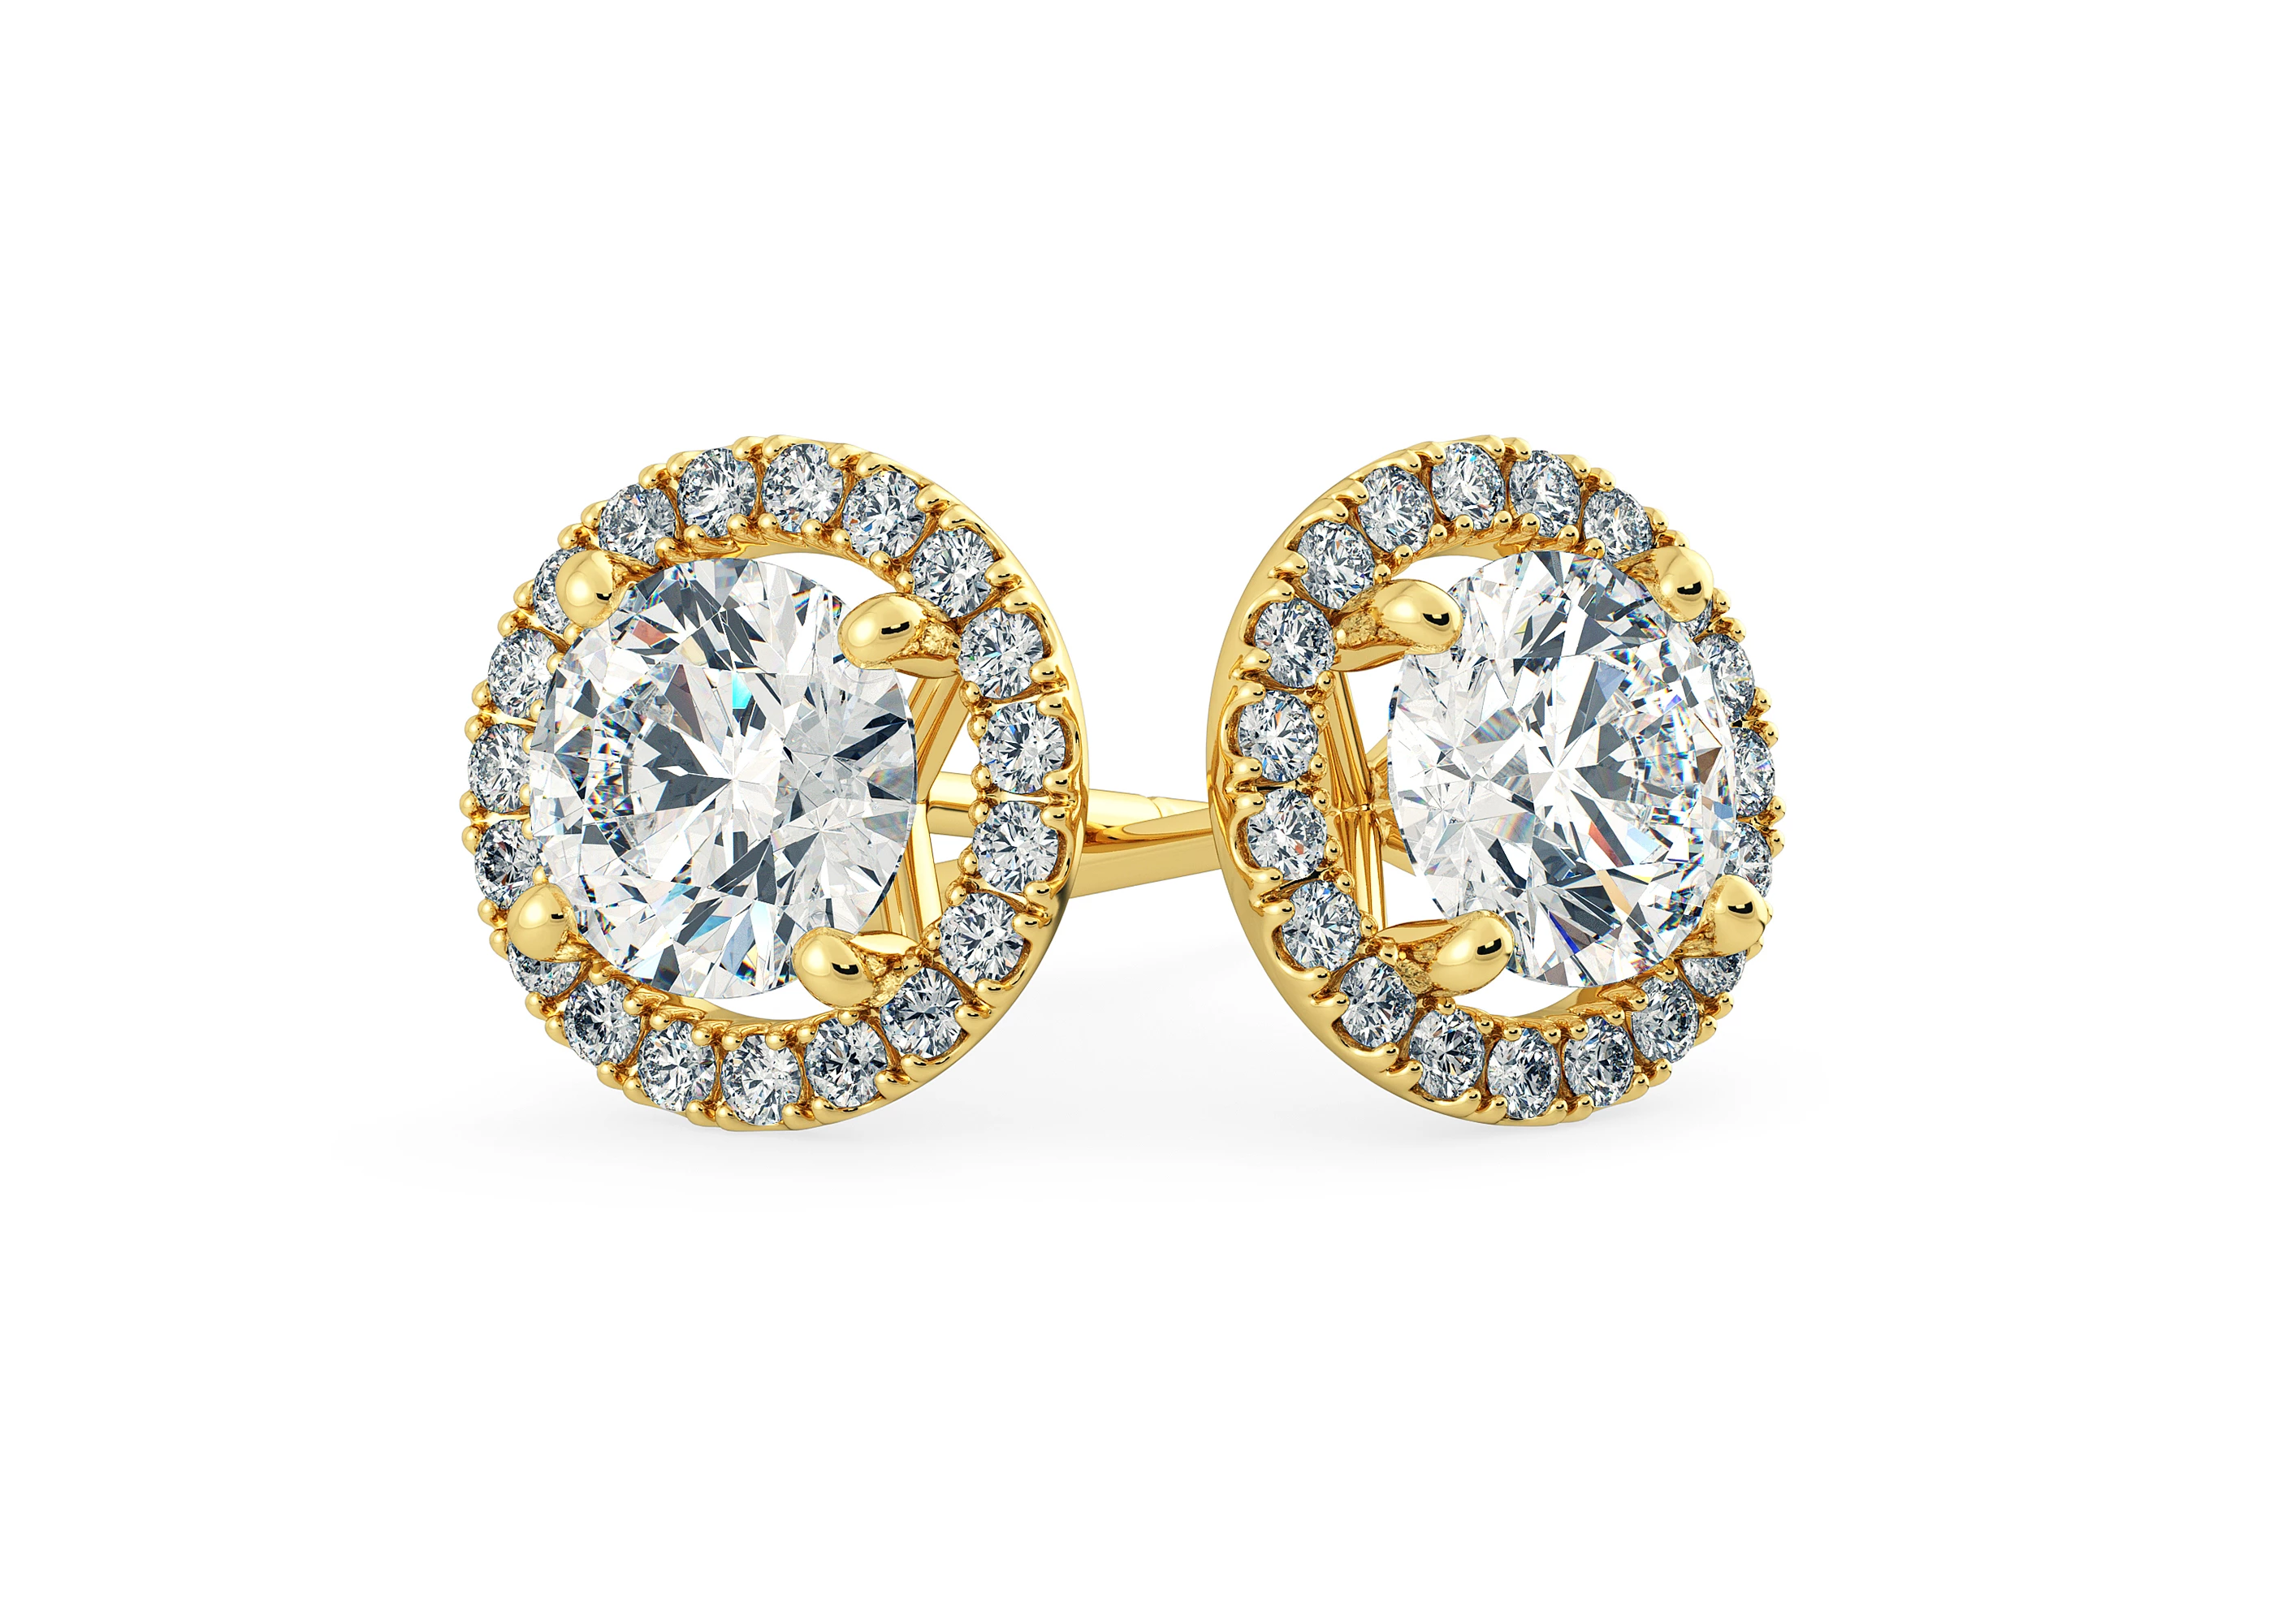 Bijou Round Brilliant Diamond Stud Earrings in 18K Yellow Gold with Butterfly Backs